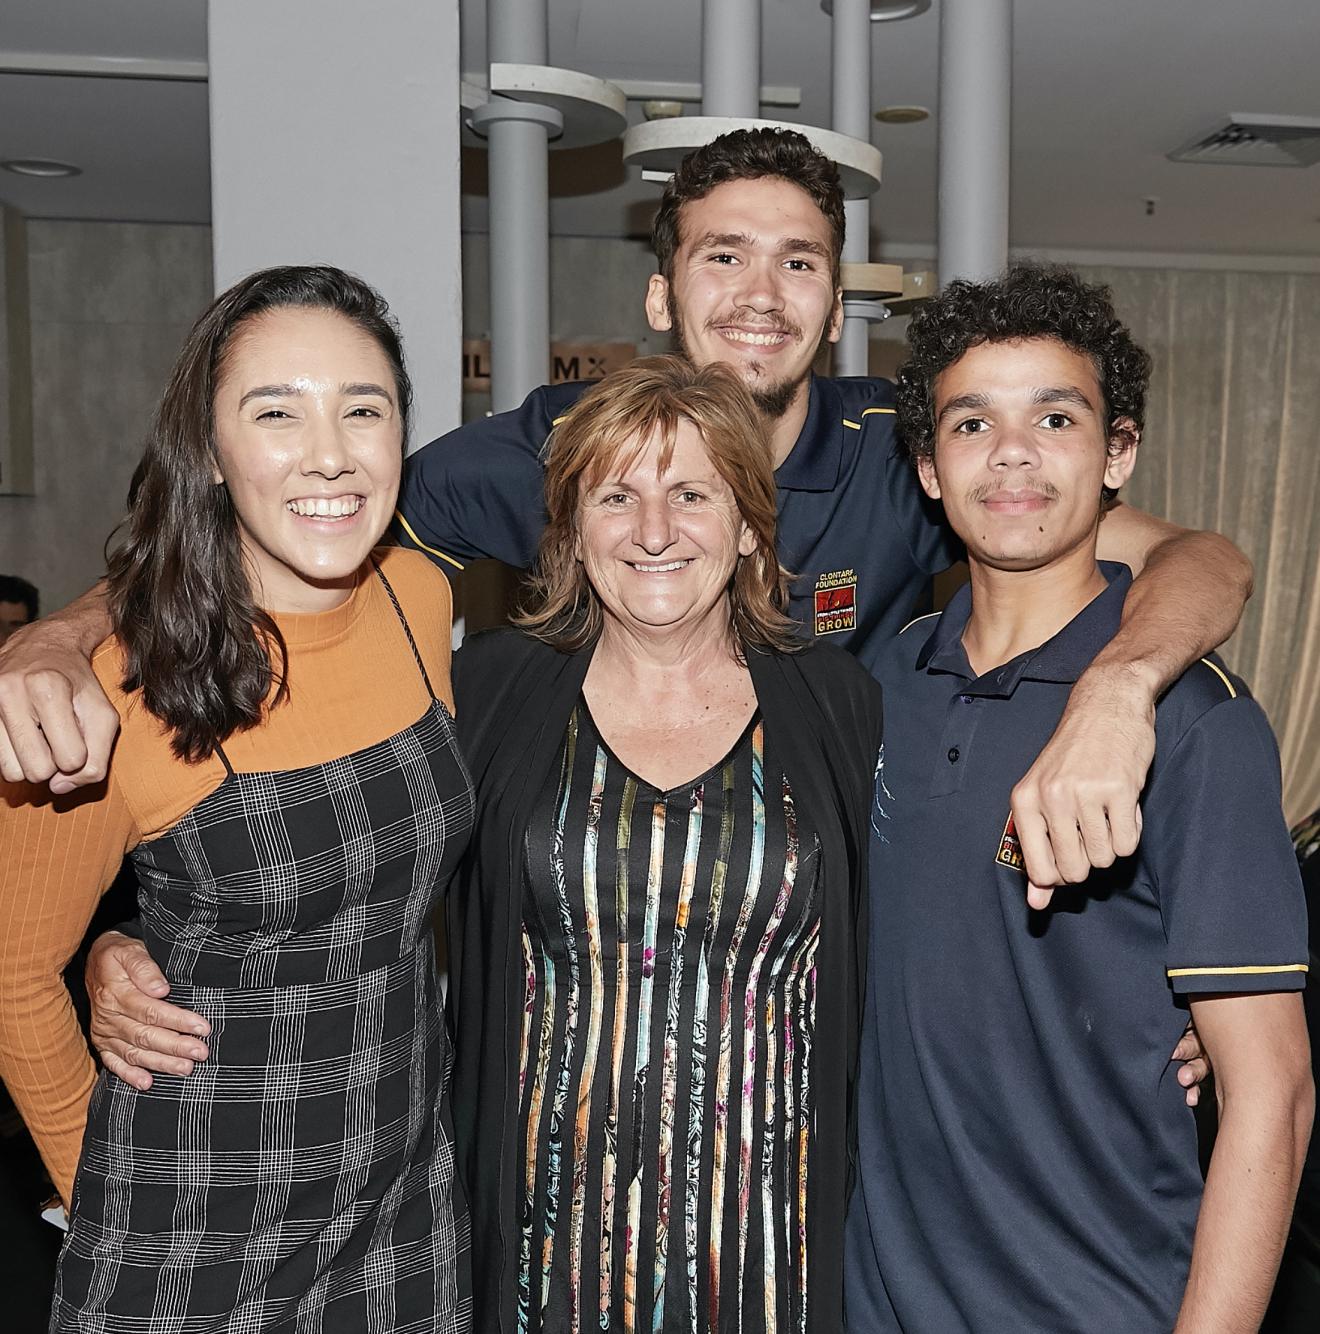 Four Indigenous people in a group photo. The central figure is UTS Elder-in-Residence Aunty Glendra Stubbs. To her right is a female Indigenous student, to her left and behind her are two young Indigenous high school students.